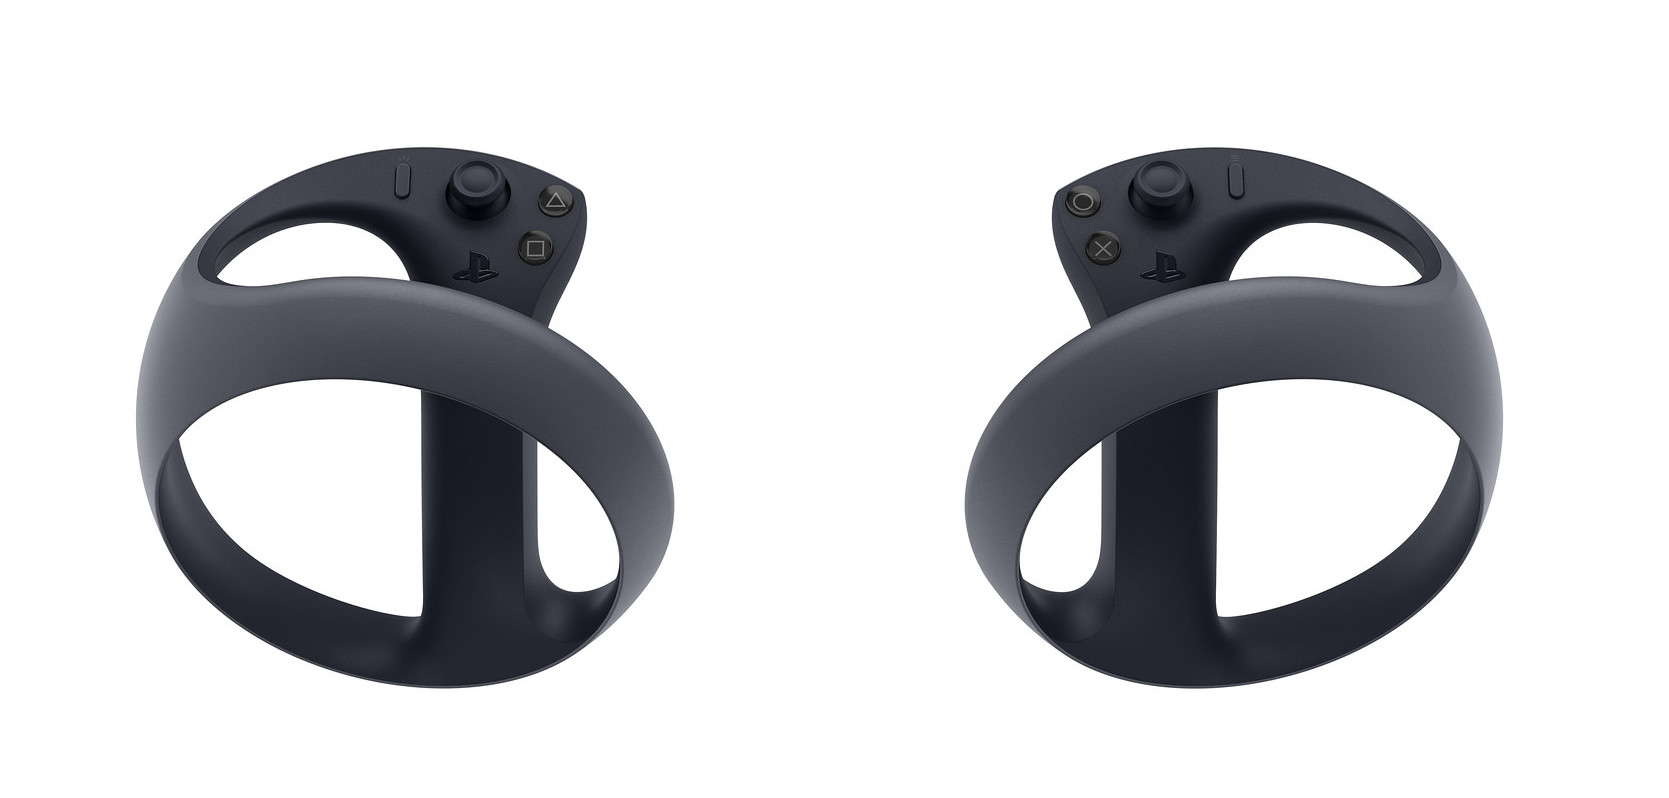 Sony unveils new PS VR controllers with haptic feedback - 9to5Toys